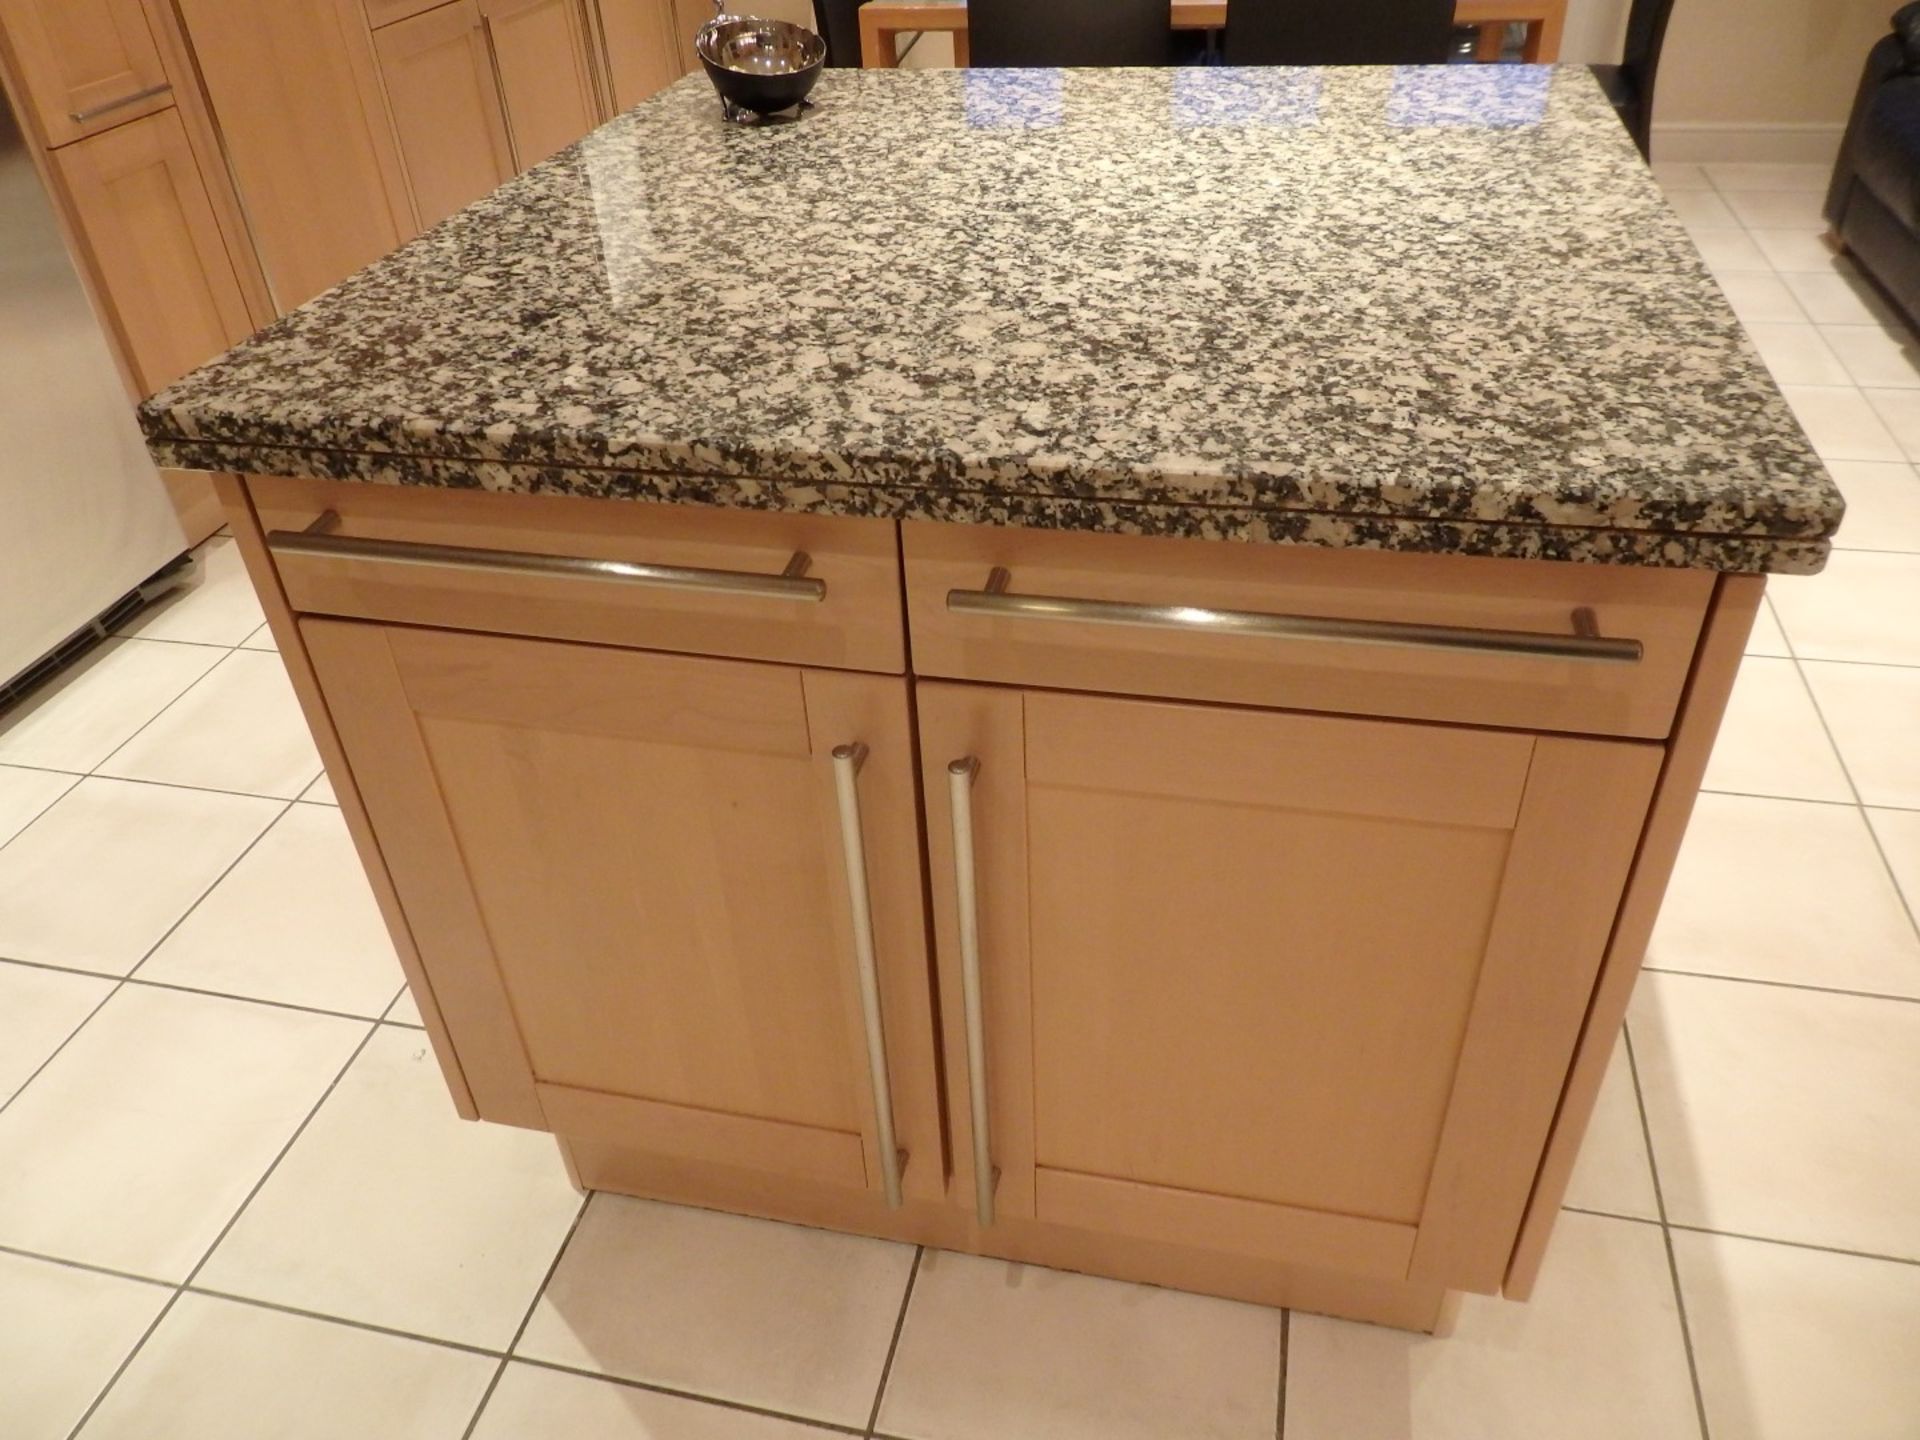 1 x Siematic Fitted Kitchen With Beech Shaker Style Doors, Granite Worktops, Central Island and - Image 84 of 148